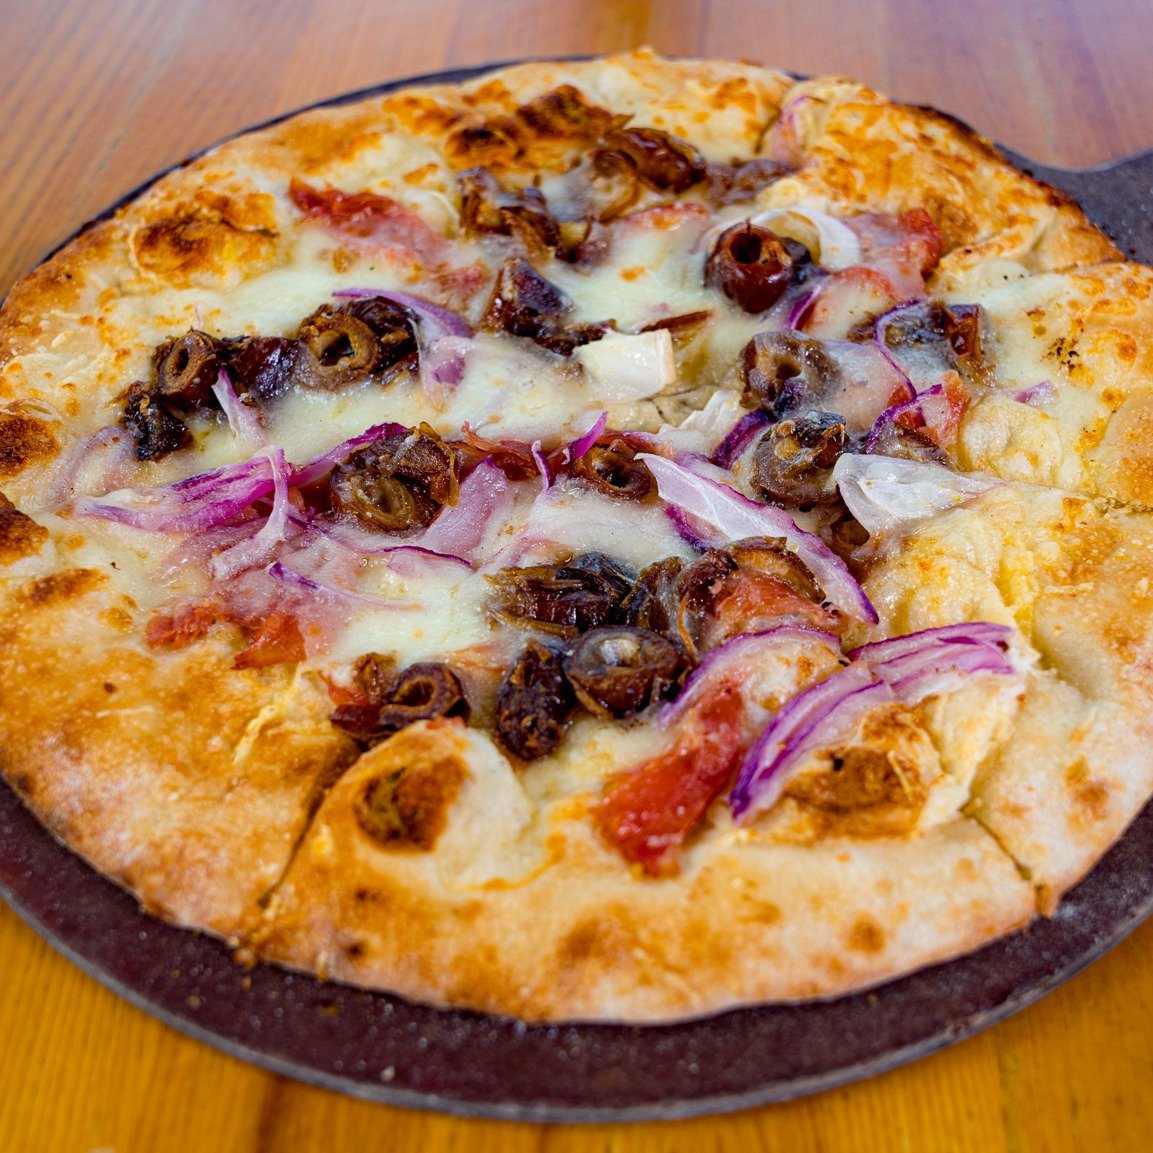 Hey food lovers, why just wine and dine when you can truffle and date at the same time? Try our Truffle &amp; Date Pizza, where every slice is a mingle-fest of prosciutto, sweet dates, and a drizzle of white truffle oil that'll make your tastebuds sw